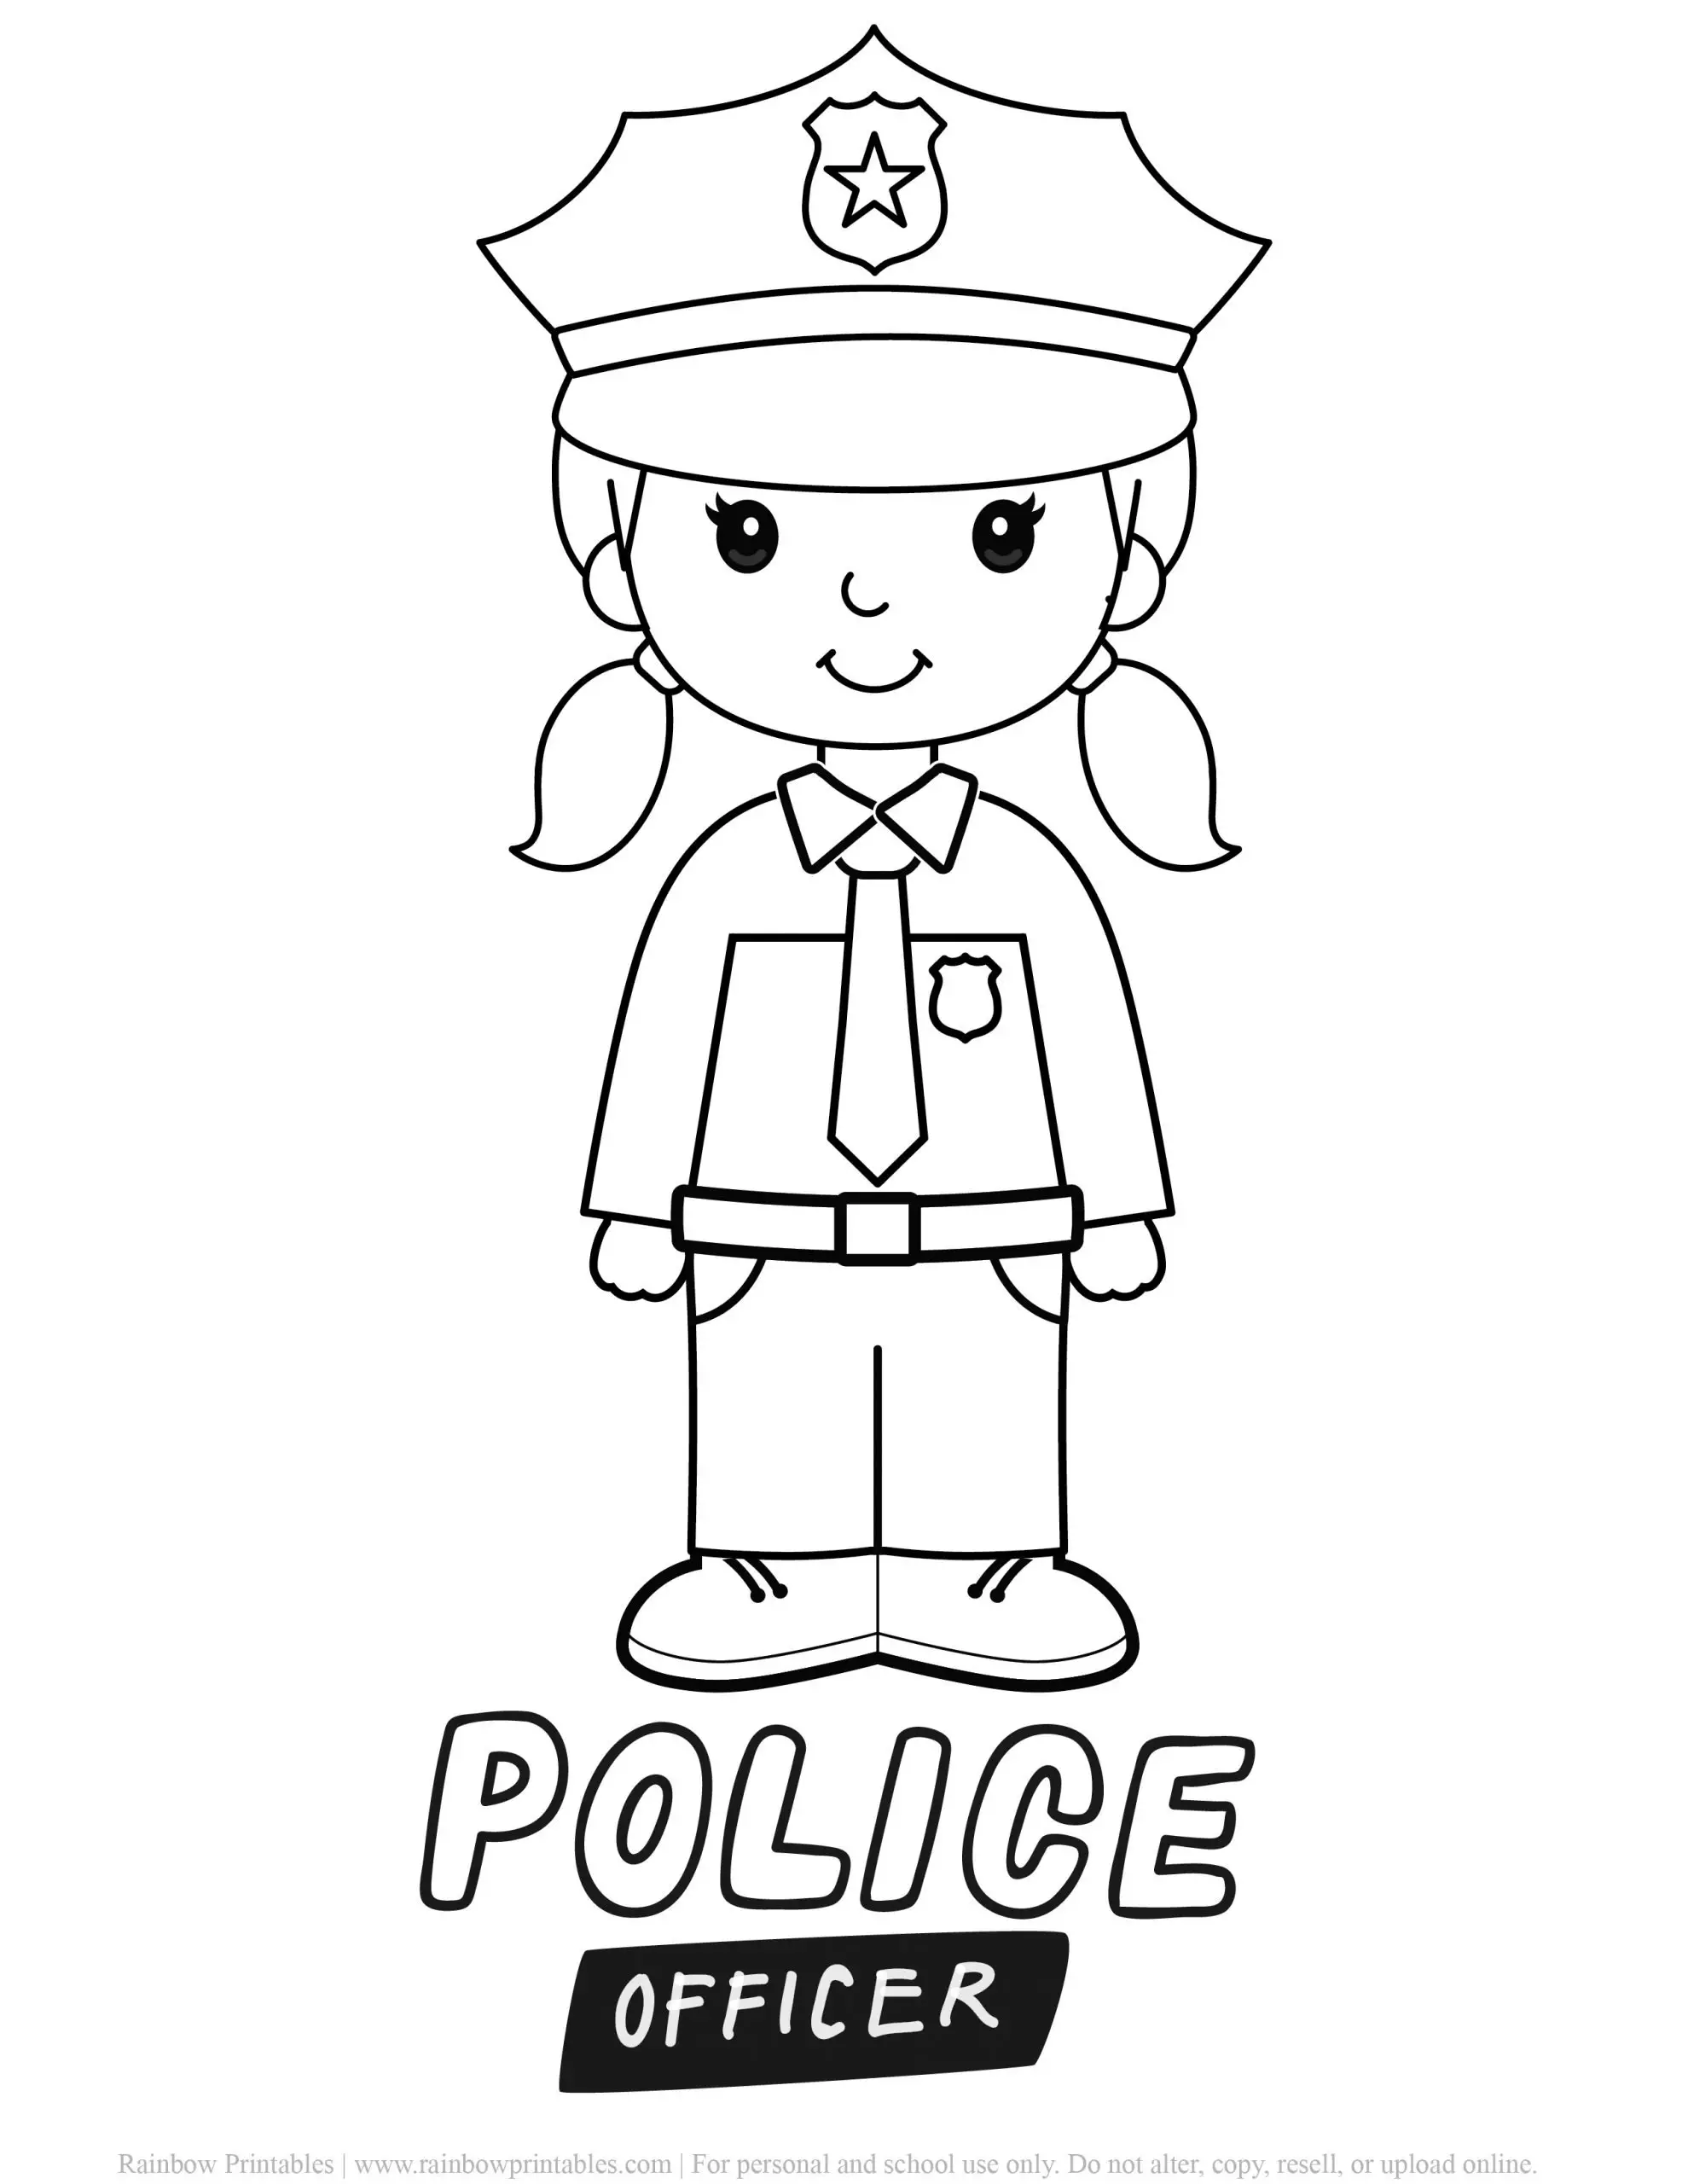 Community Helper Coloring Page Simple Young Kids Clipart Illustration Female Police Coloring Sheet Officer in Uniform Cop Hat